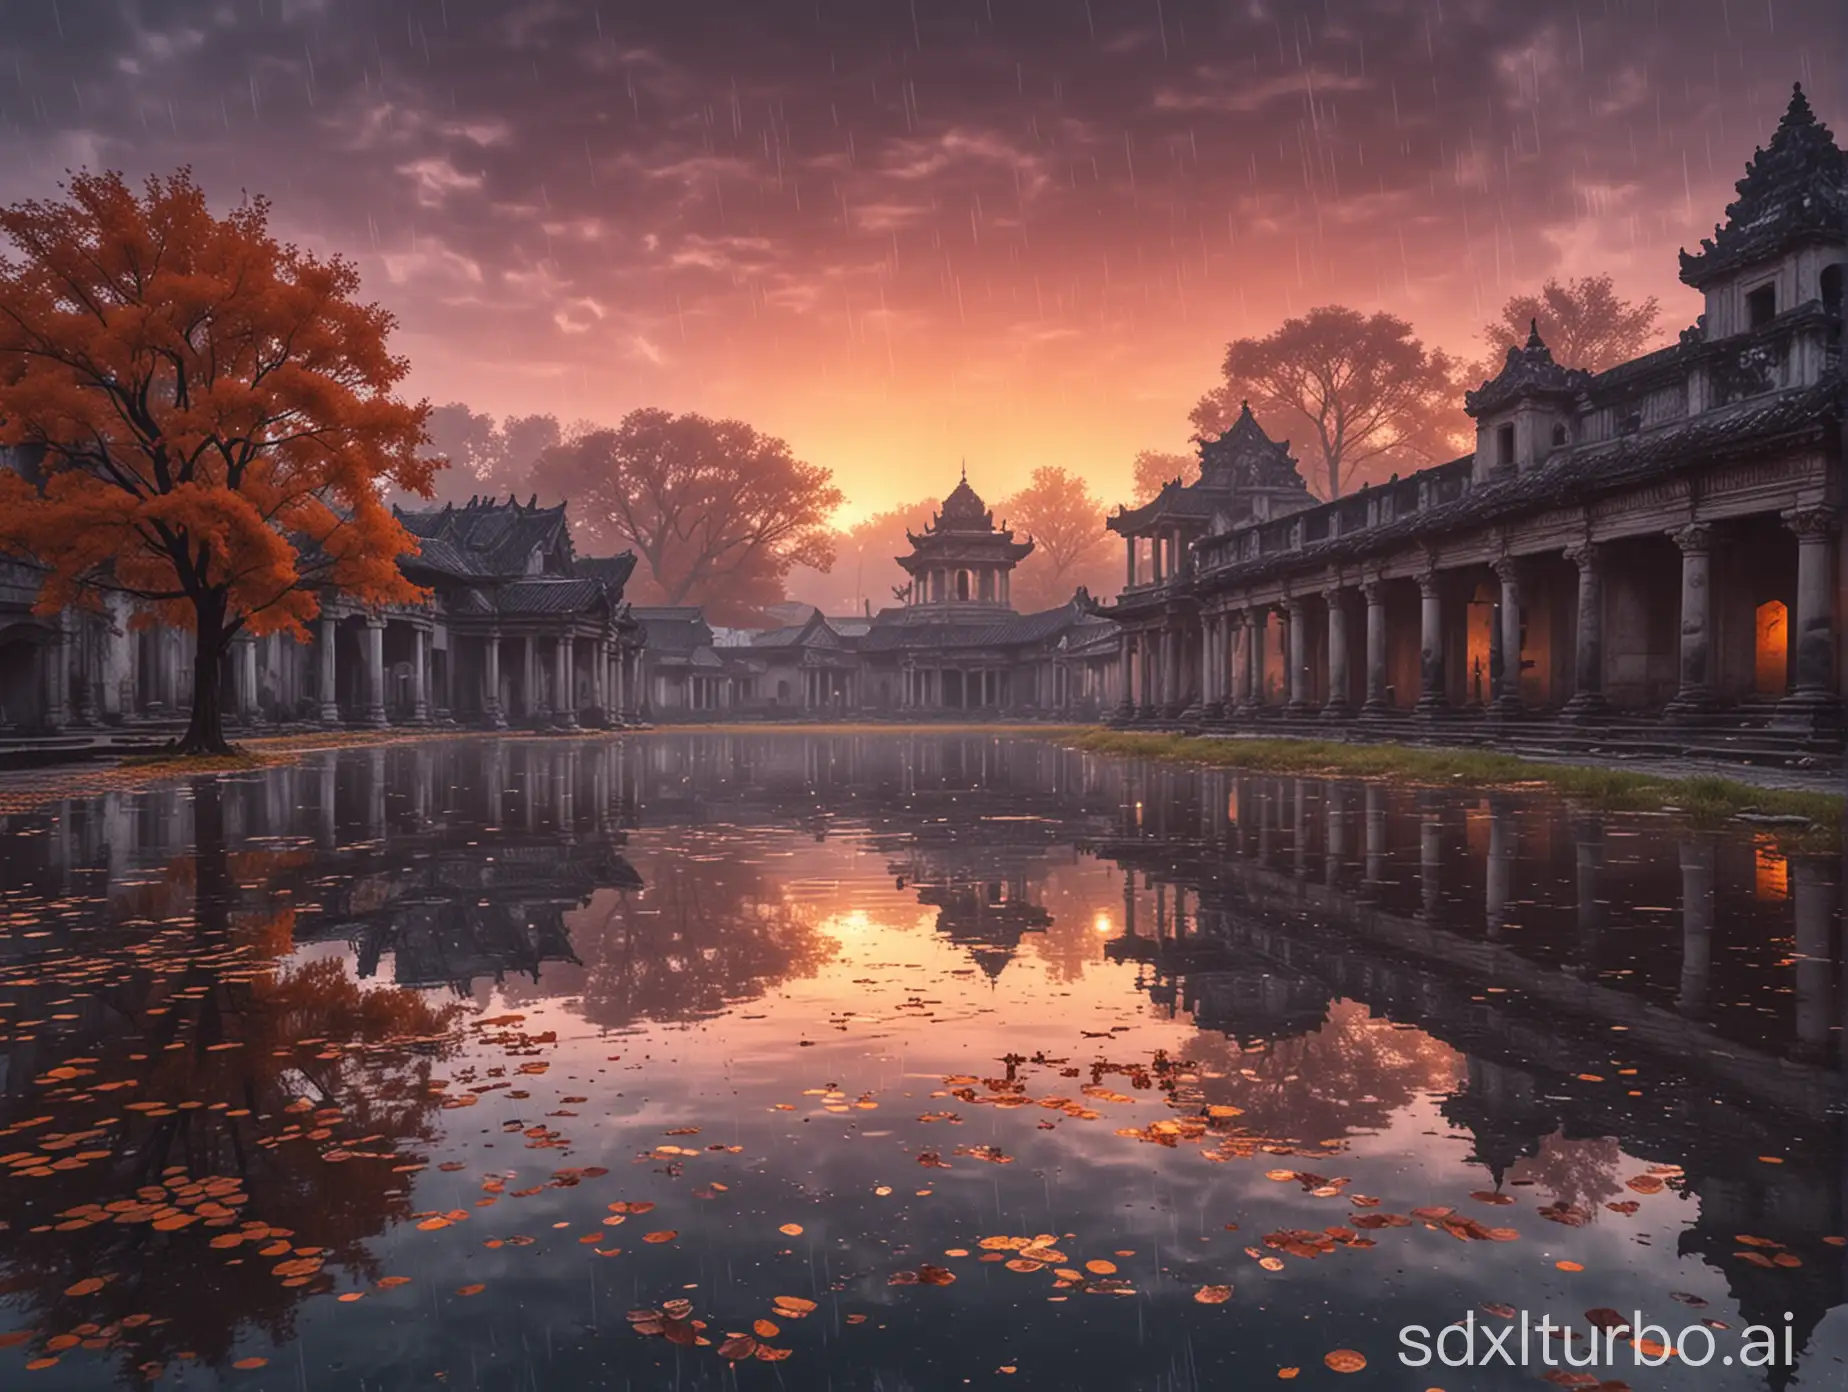 Landscape photo: Twilight rain under the autumn sunset, water and sky in one color. In a cool tone, a sunset hangs over ancient architecture. 4K clear picture with beautiful scenery. 